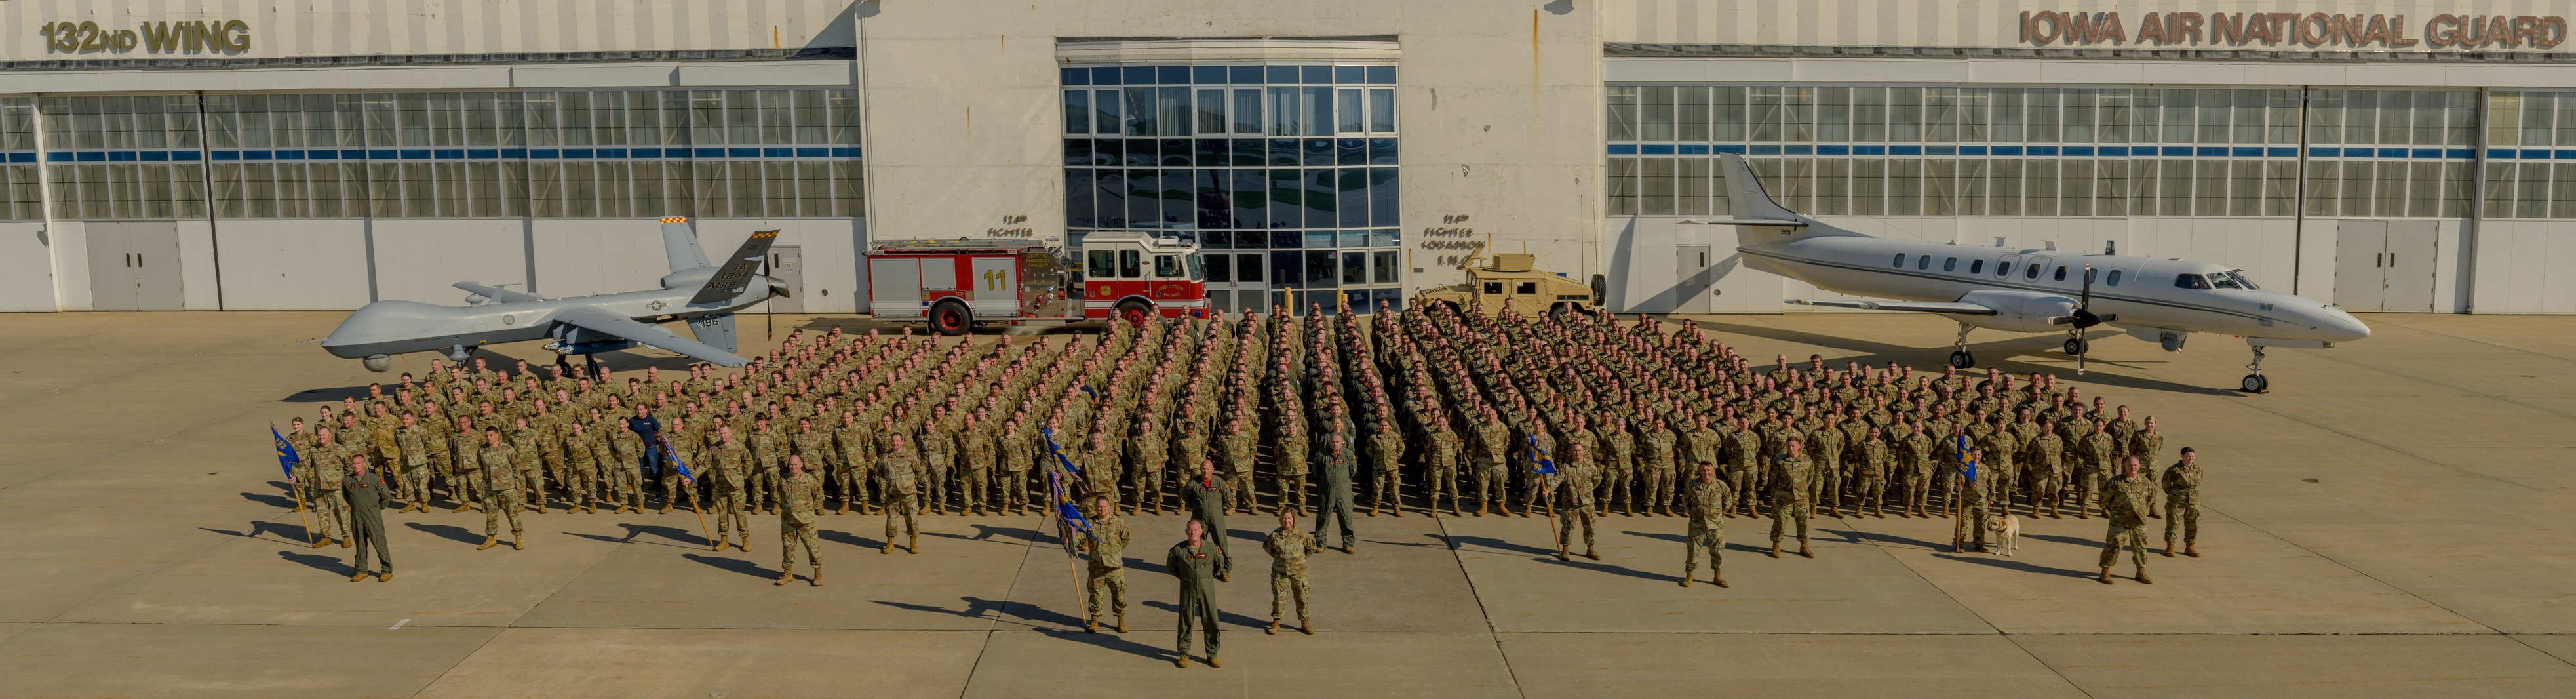 A large group of Airmen stand in formation for a group photo with aircraft in the background